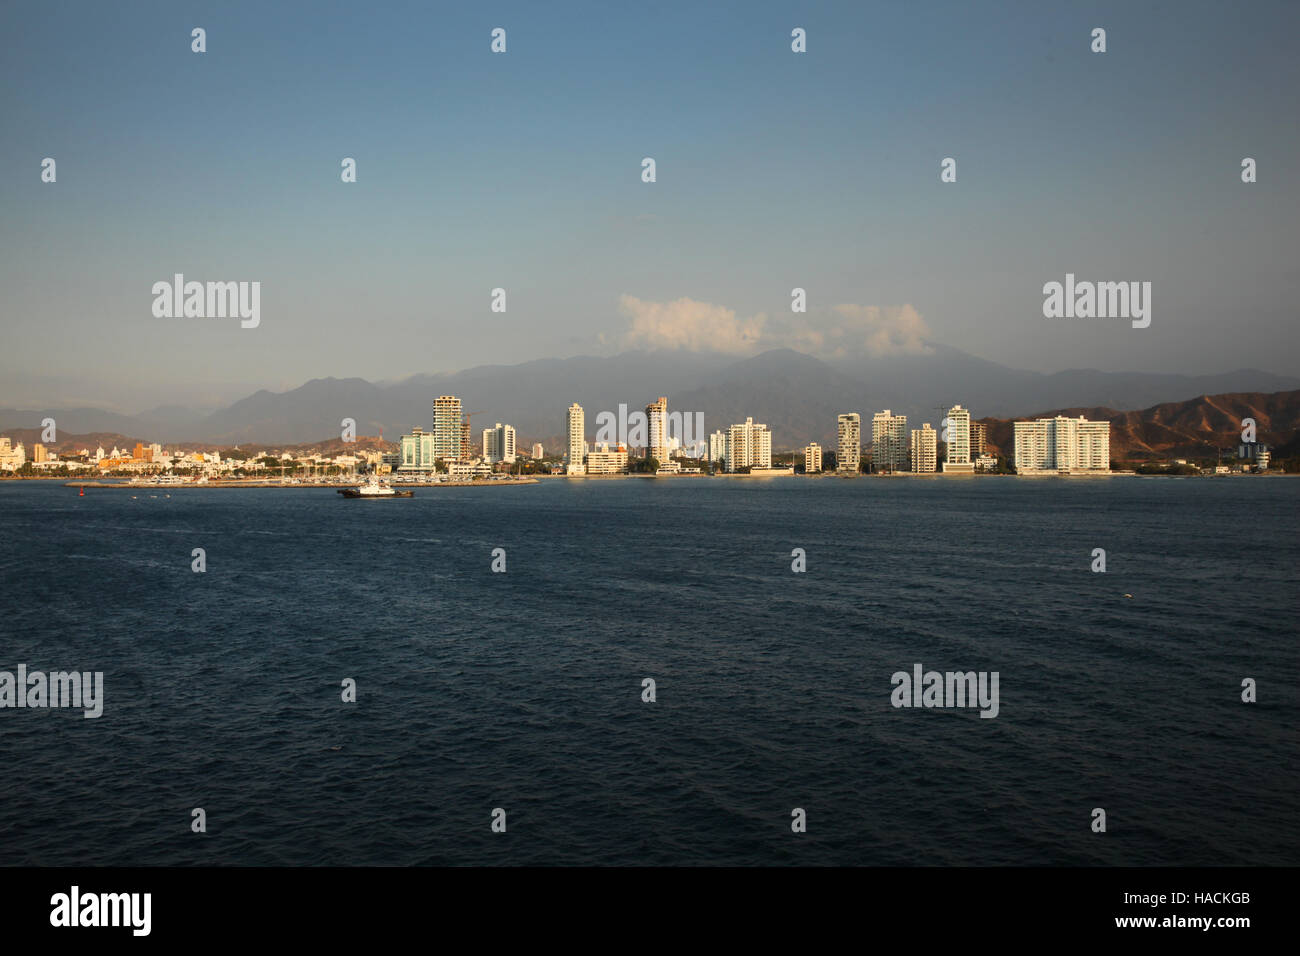 Caribbean coastline of Santa Marta, Colombia from the sea showing the skyline of the city. Stock Photo